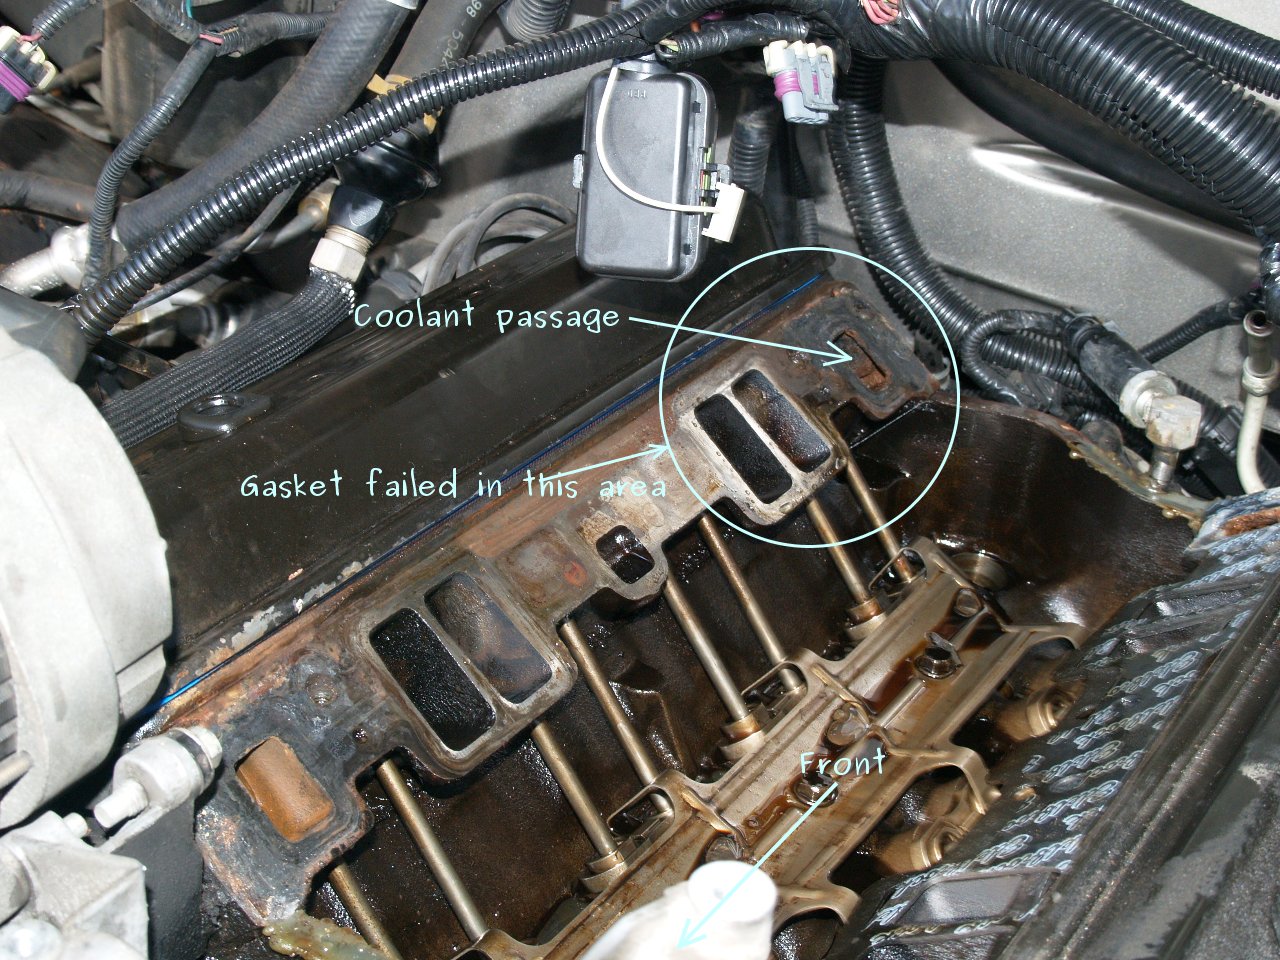 See P3974 in engine